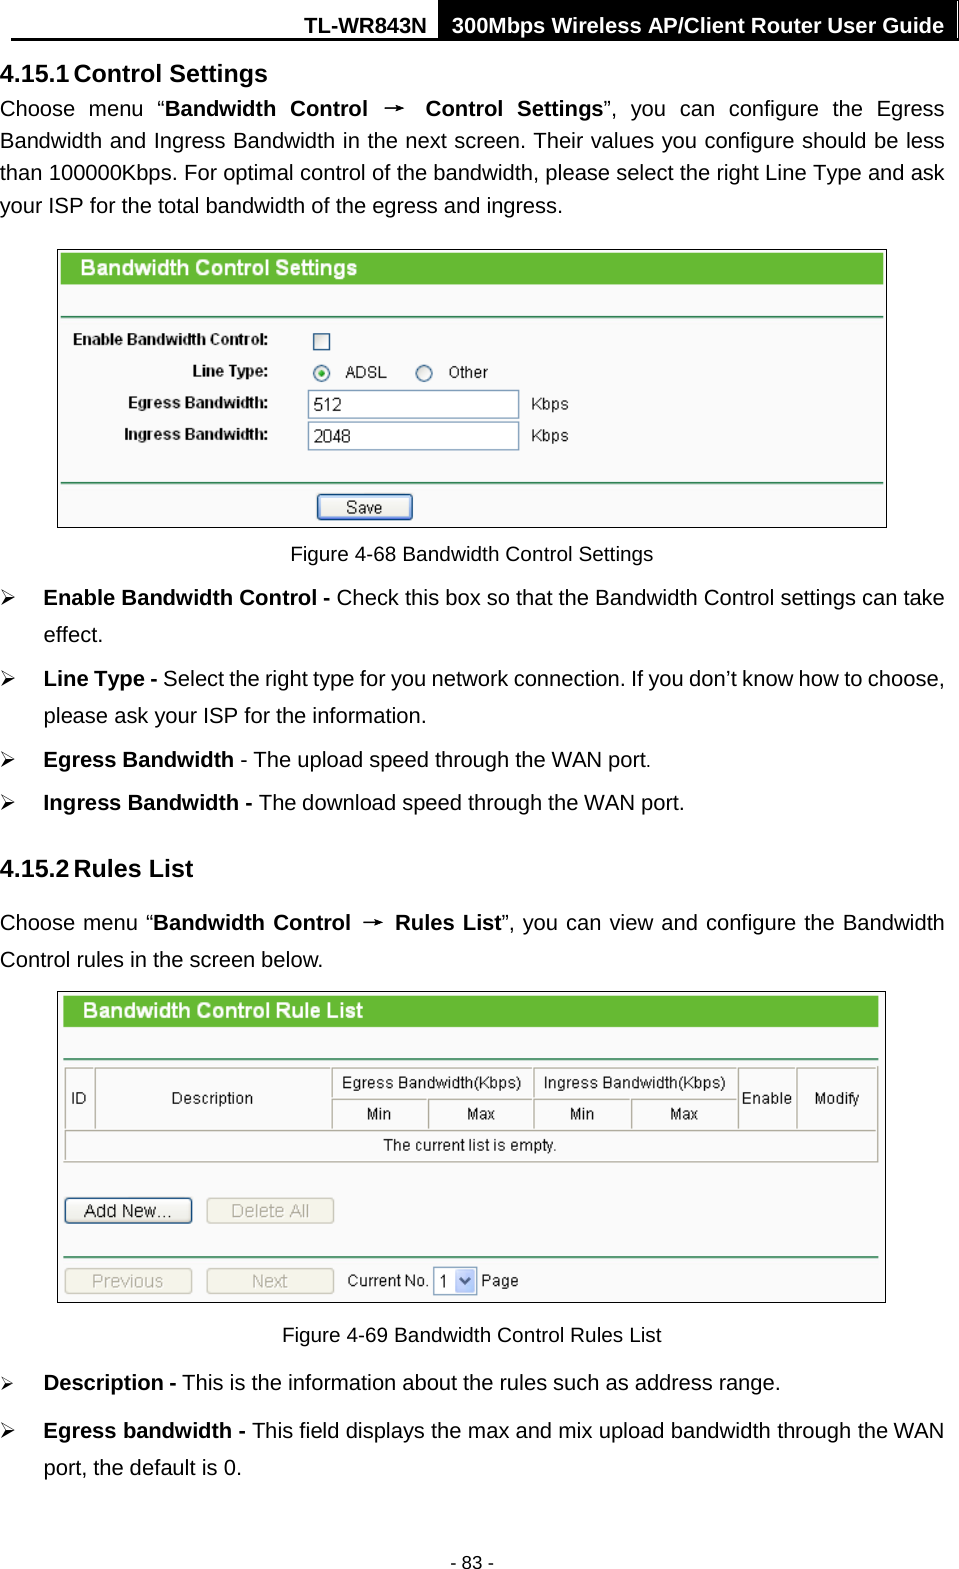 TL-WR843N 300Mbps Wireless AP/Client Router User Guide - 83 - 4.15.1 Control Settings Choose menu “Bandwidth Control → Control Settings”, you can configure the Egress Bandwidth and Ingress Bandwidth in the next screen. Their values you configure should be less than 100000Kbps. For optimal control of the bandwidth, please select the right Line Type and ask your ISP for the total bandwidth of the egress and ingress. Figure 4-68 Bandwidth Control Settings Enable Bandwidth Control - Check this box so that the Bandwidth Control settings can takeeffect.Line Type - Select the right type for you network connection. If you don’t know how to choose,please ask your ISP for the information.Egress Bandwidth - The upload speed through the WAN port.Ingress Bandwidth - The download speed through the WAN port.4.15.2 Rules List Choose menu “Bandwidth Control → Rules List”, you can view and configure the Bandwidth Control rules in the screen below. Figure 4-69 Bandwidth Control Rules List Description - This is the information about the rules such as address range.Egress bandwidth - This field displays the max and mix upload bandwidth through the WANport, the default is 0.